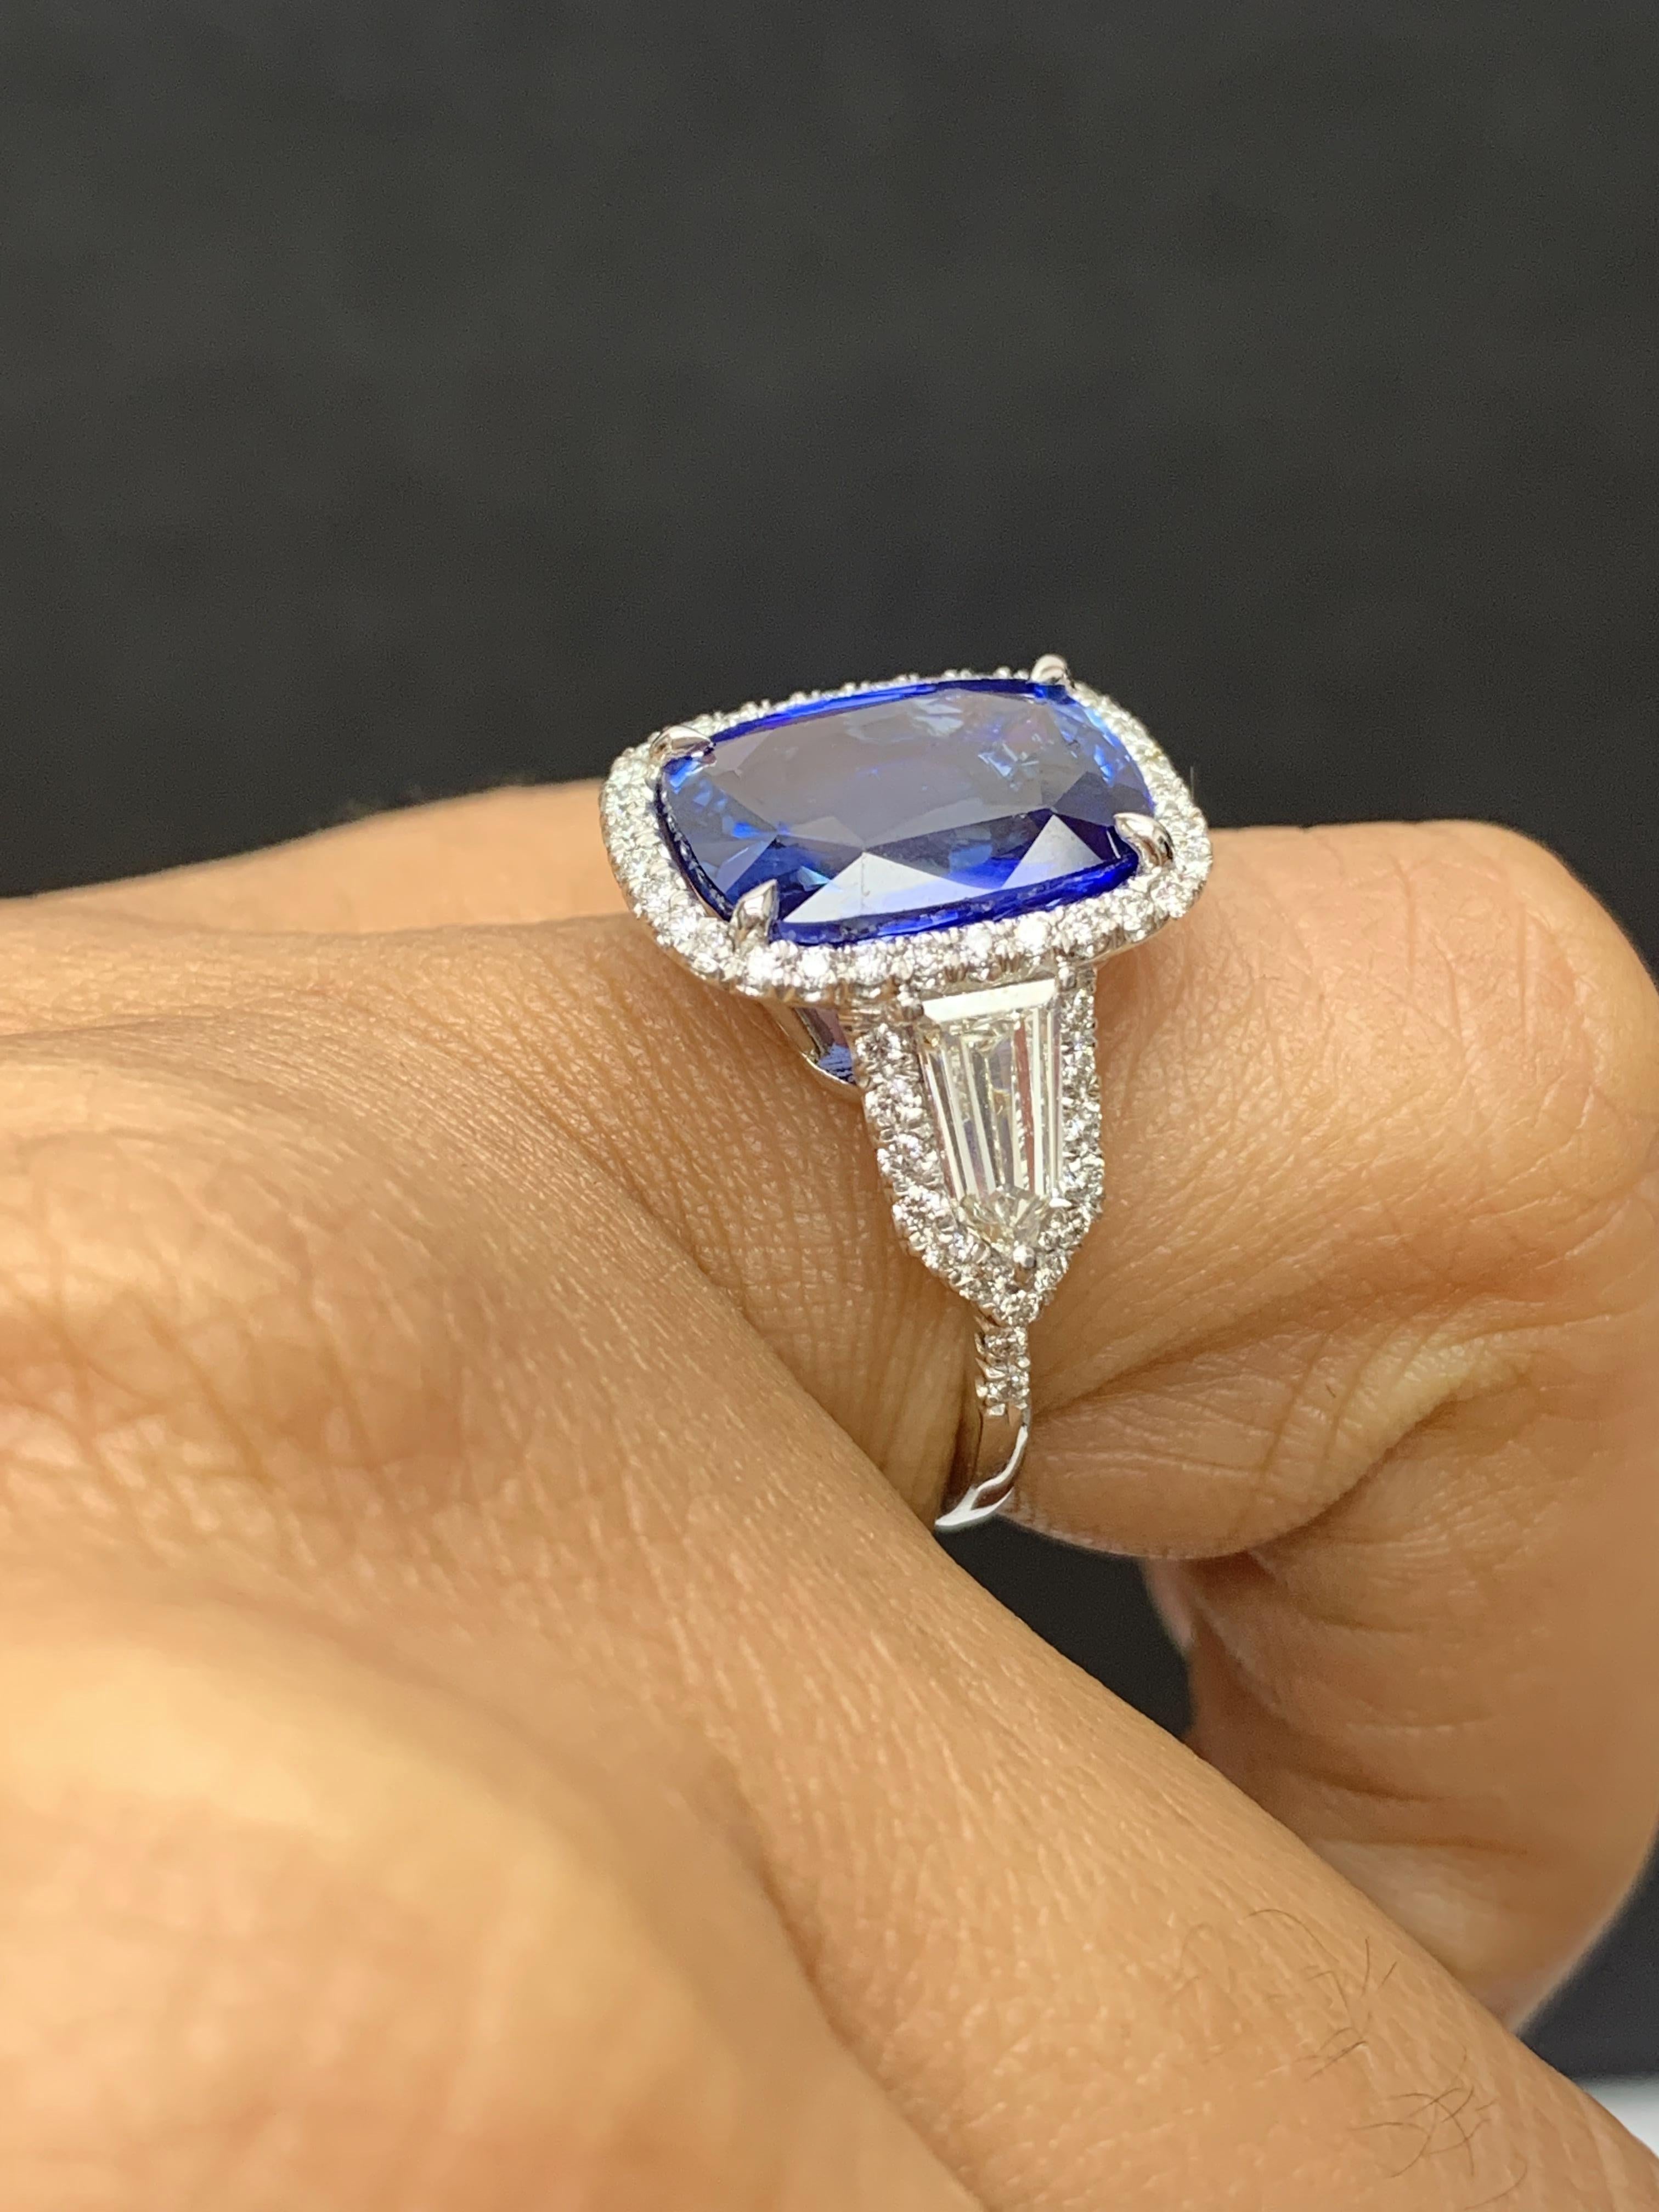 7.51 Carat Cushion Cut Sapphire and Diamond Engagement Ring in Platinum For Sale 8